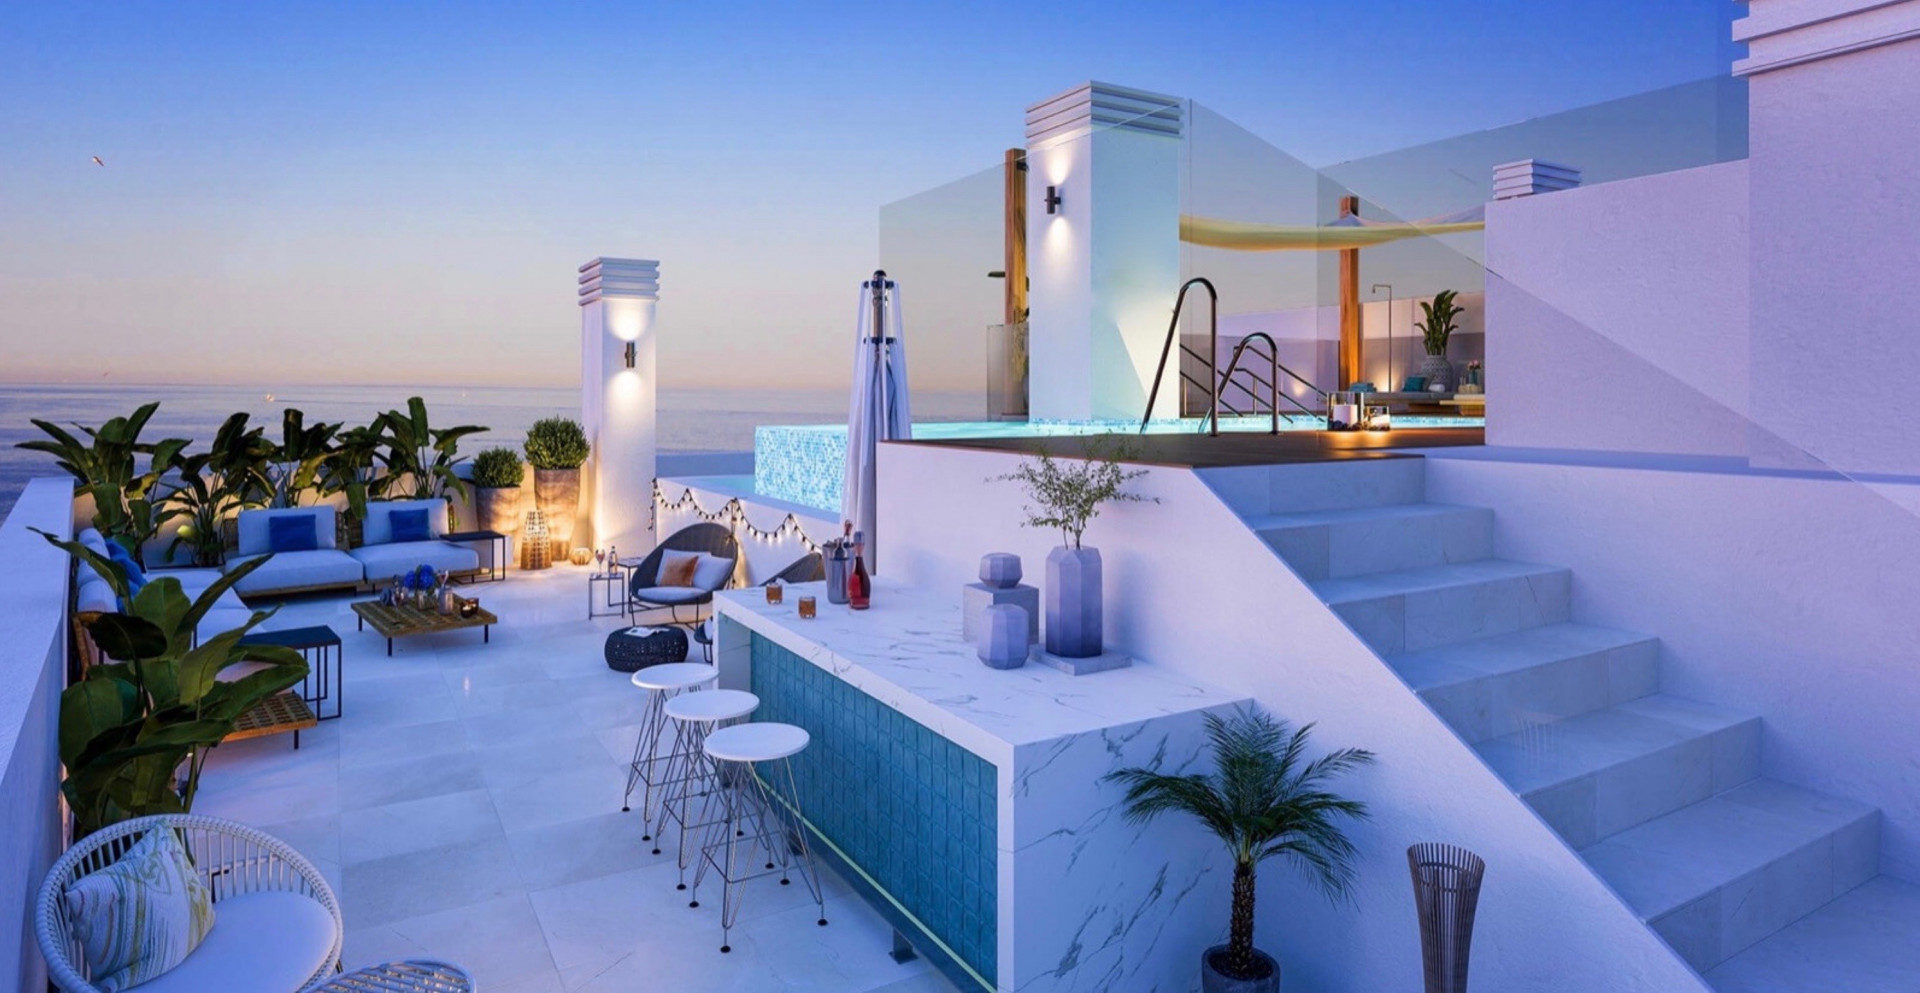 Magnificent residential development in the centre of Estepona with amazing sea views from the rooftop pool